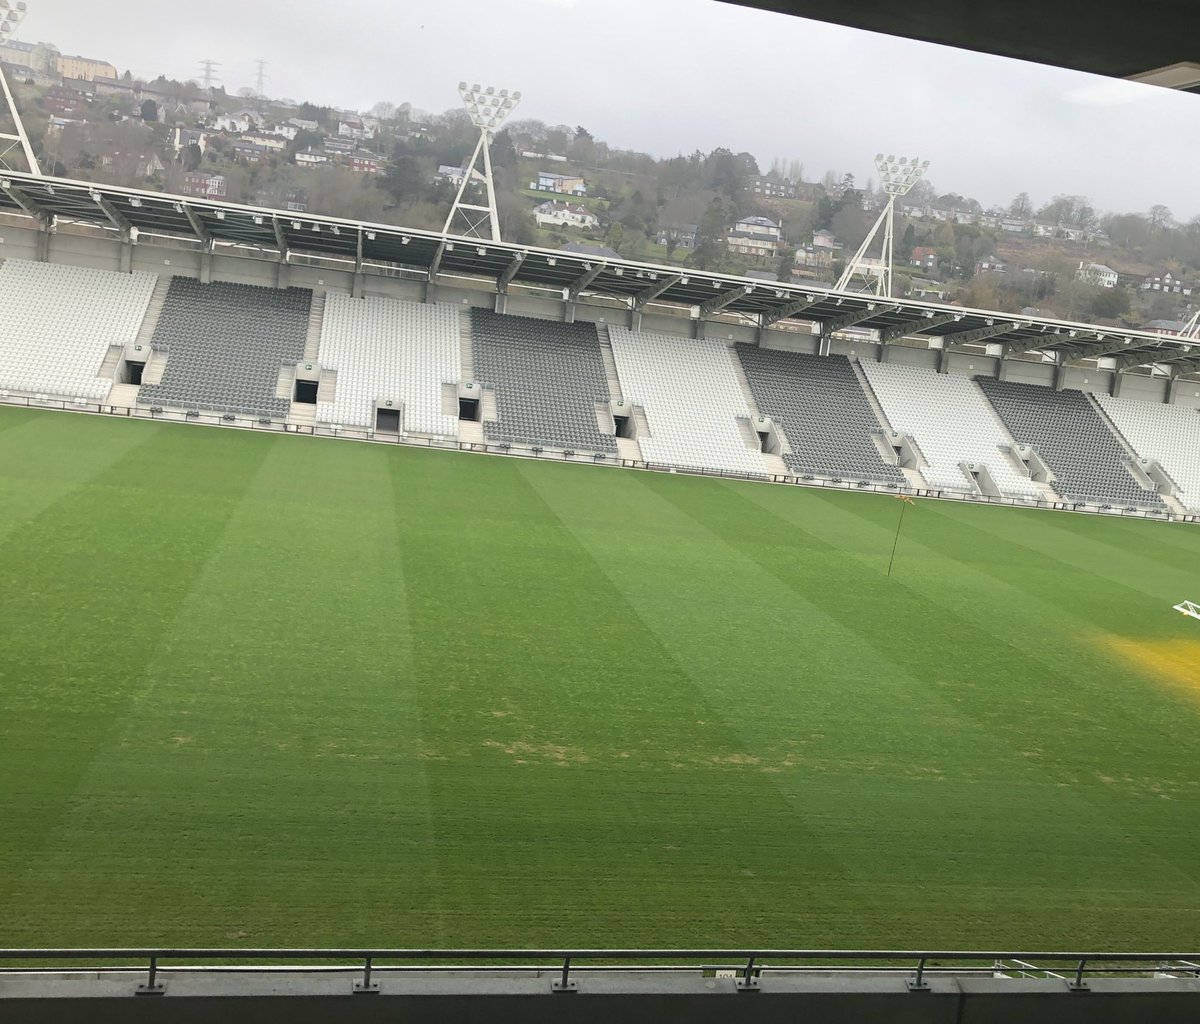 Munster Groundsman Education day at @PaircUiChaoimh1 @turftechcork @Daly_GK88 @boshaughnessy2